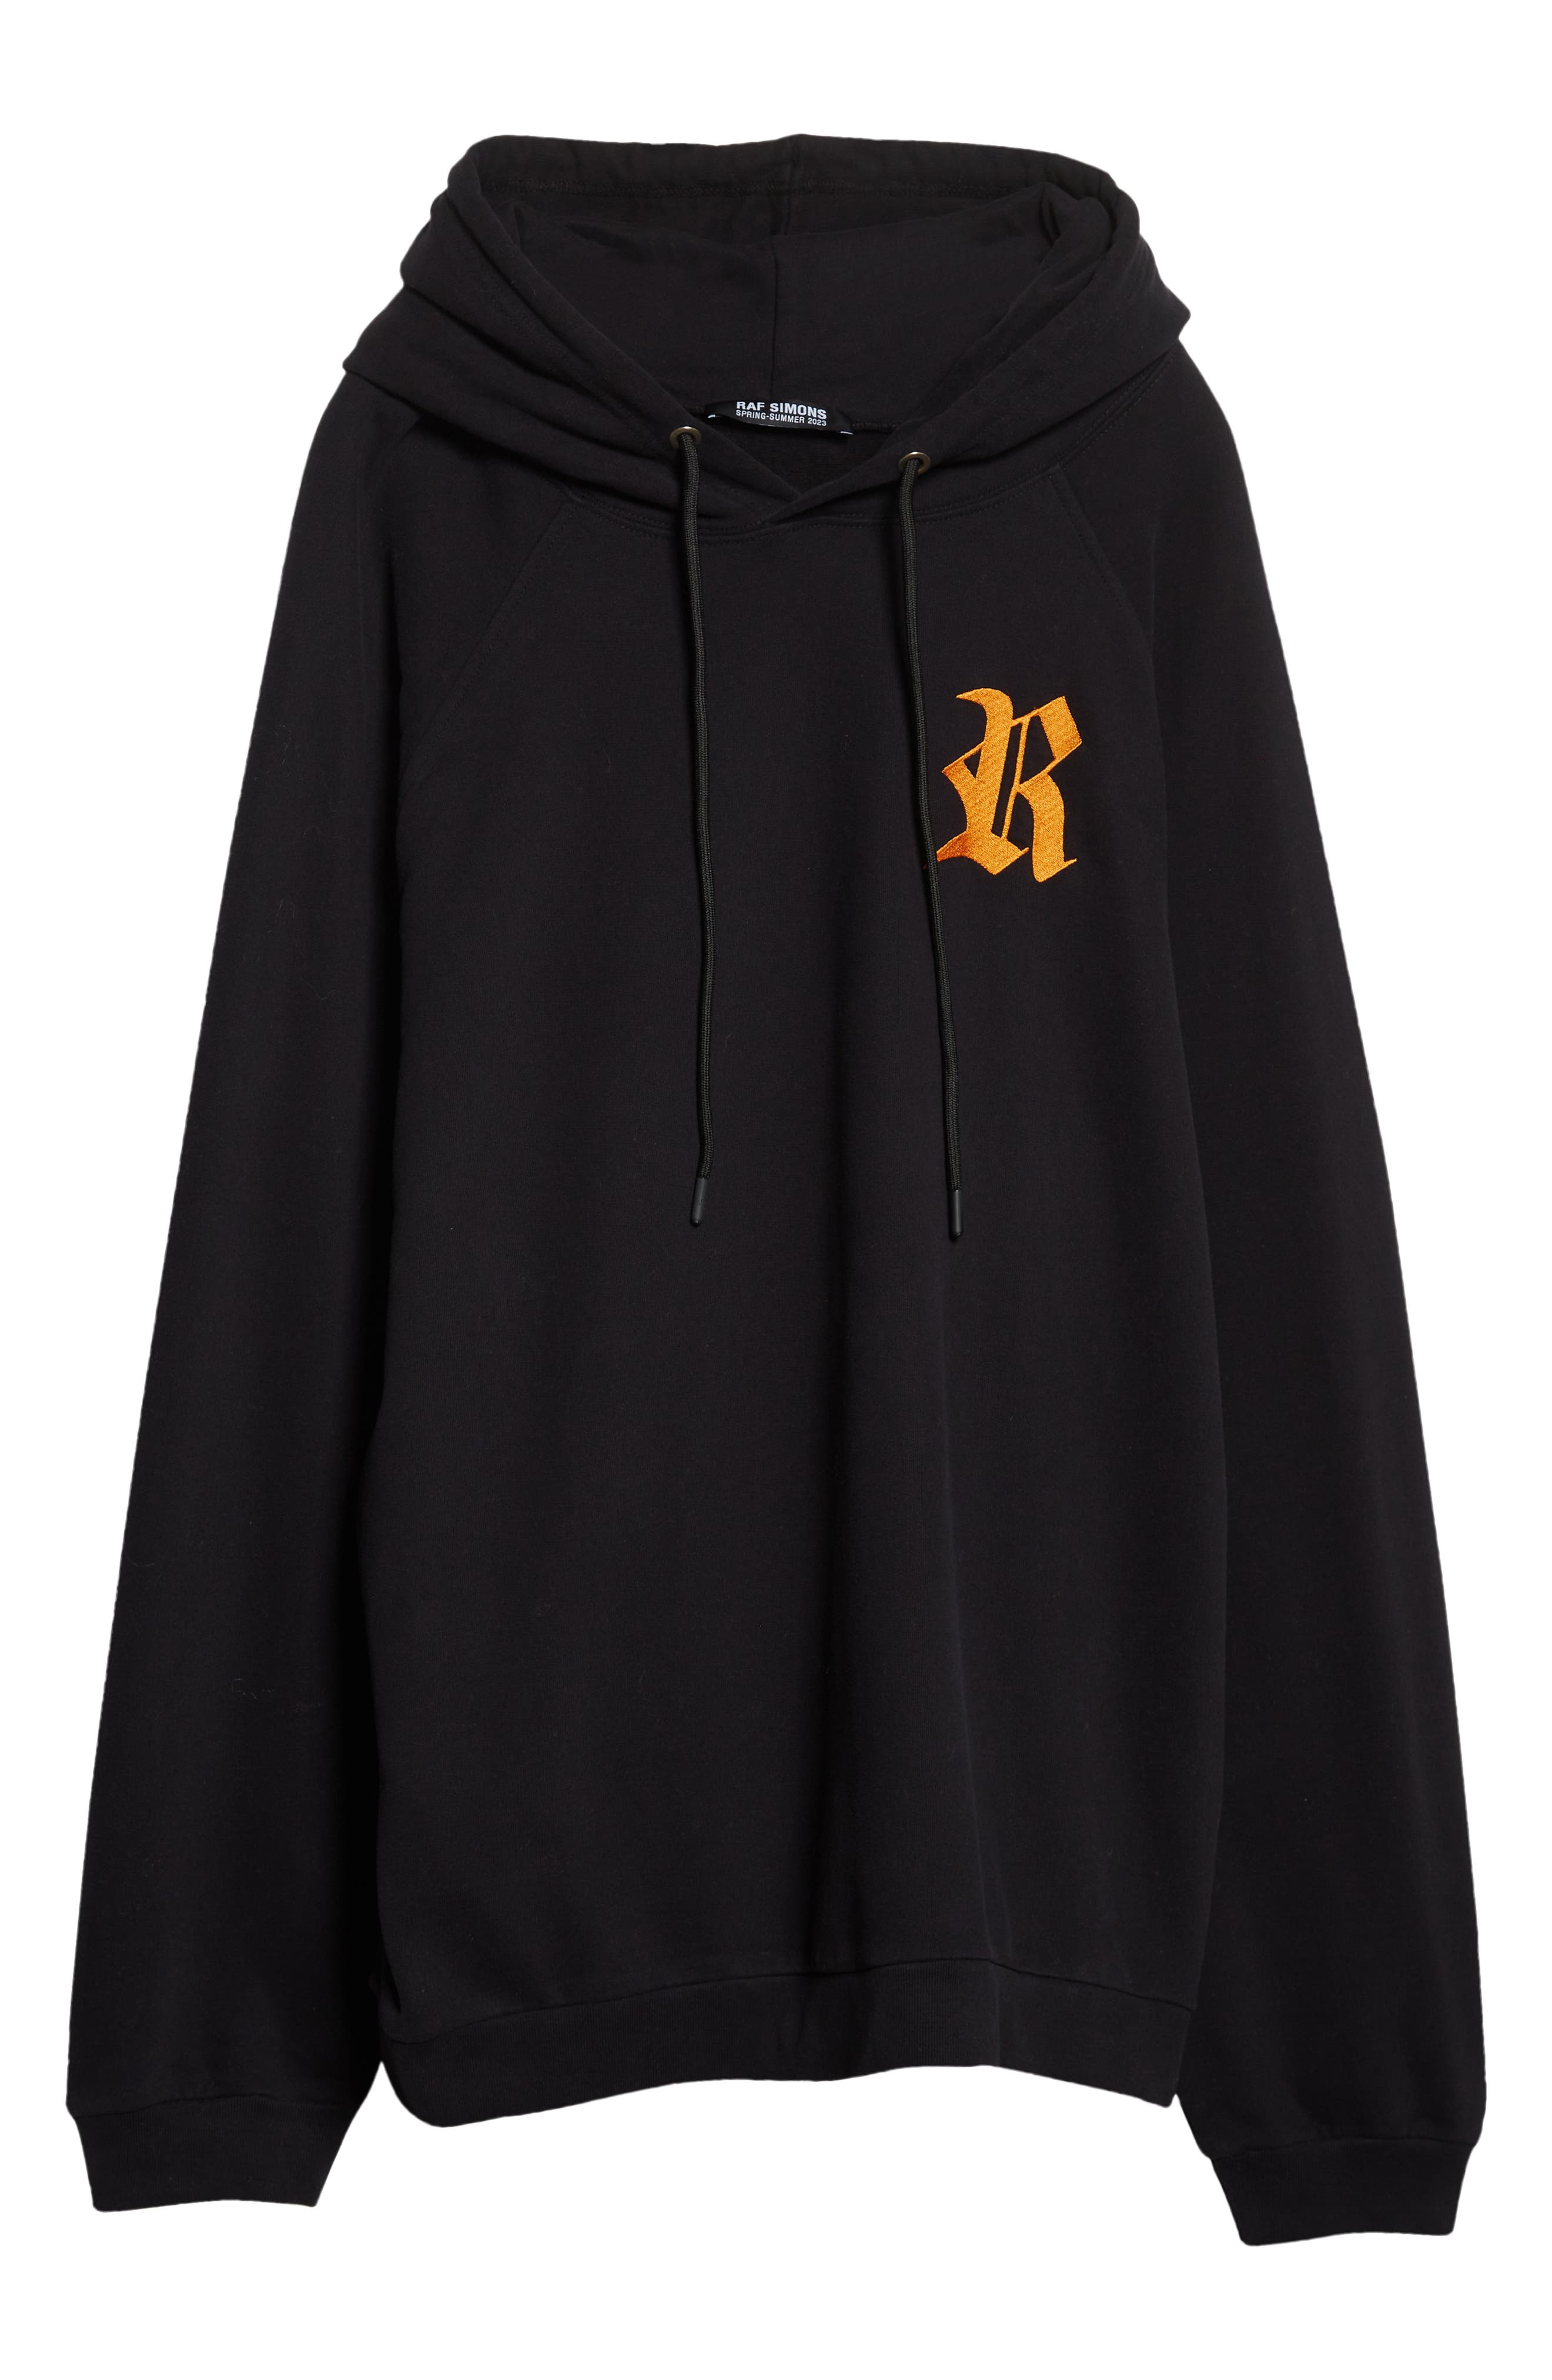 Raf Simons Embroidered 'R' Oversize Hoodie in Black-Orange 9935